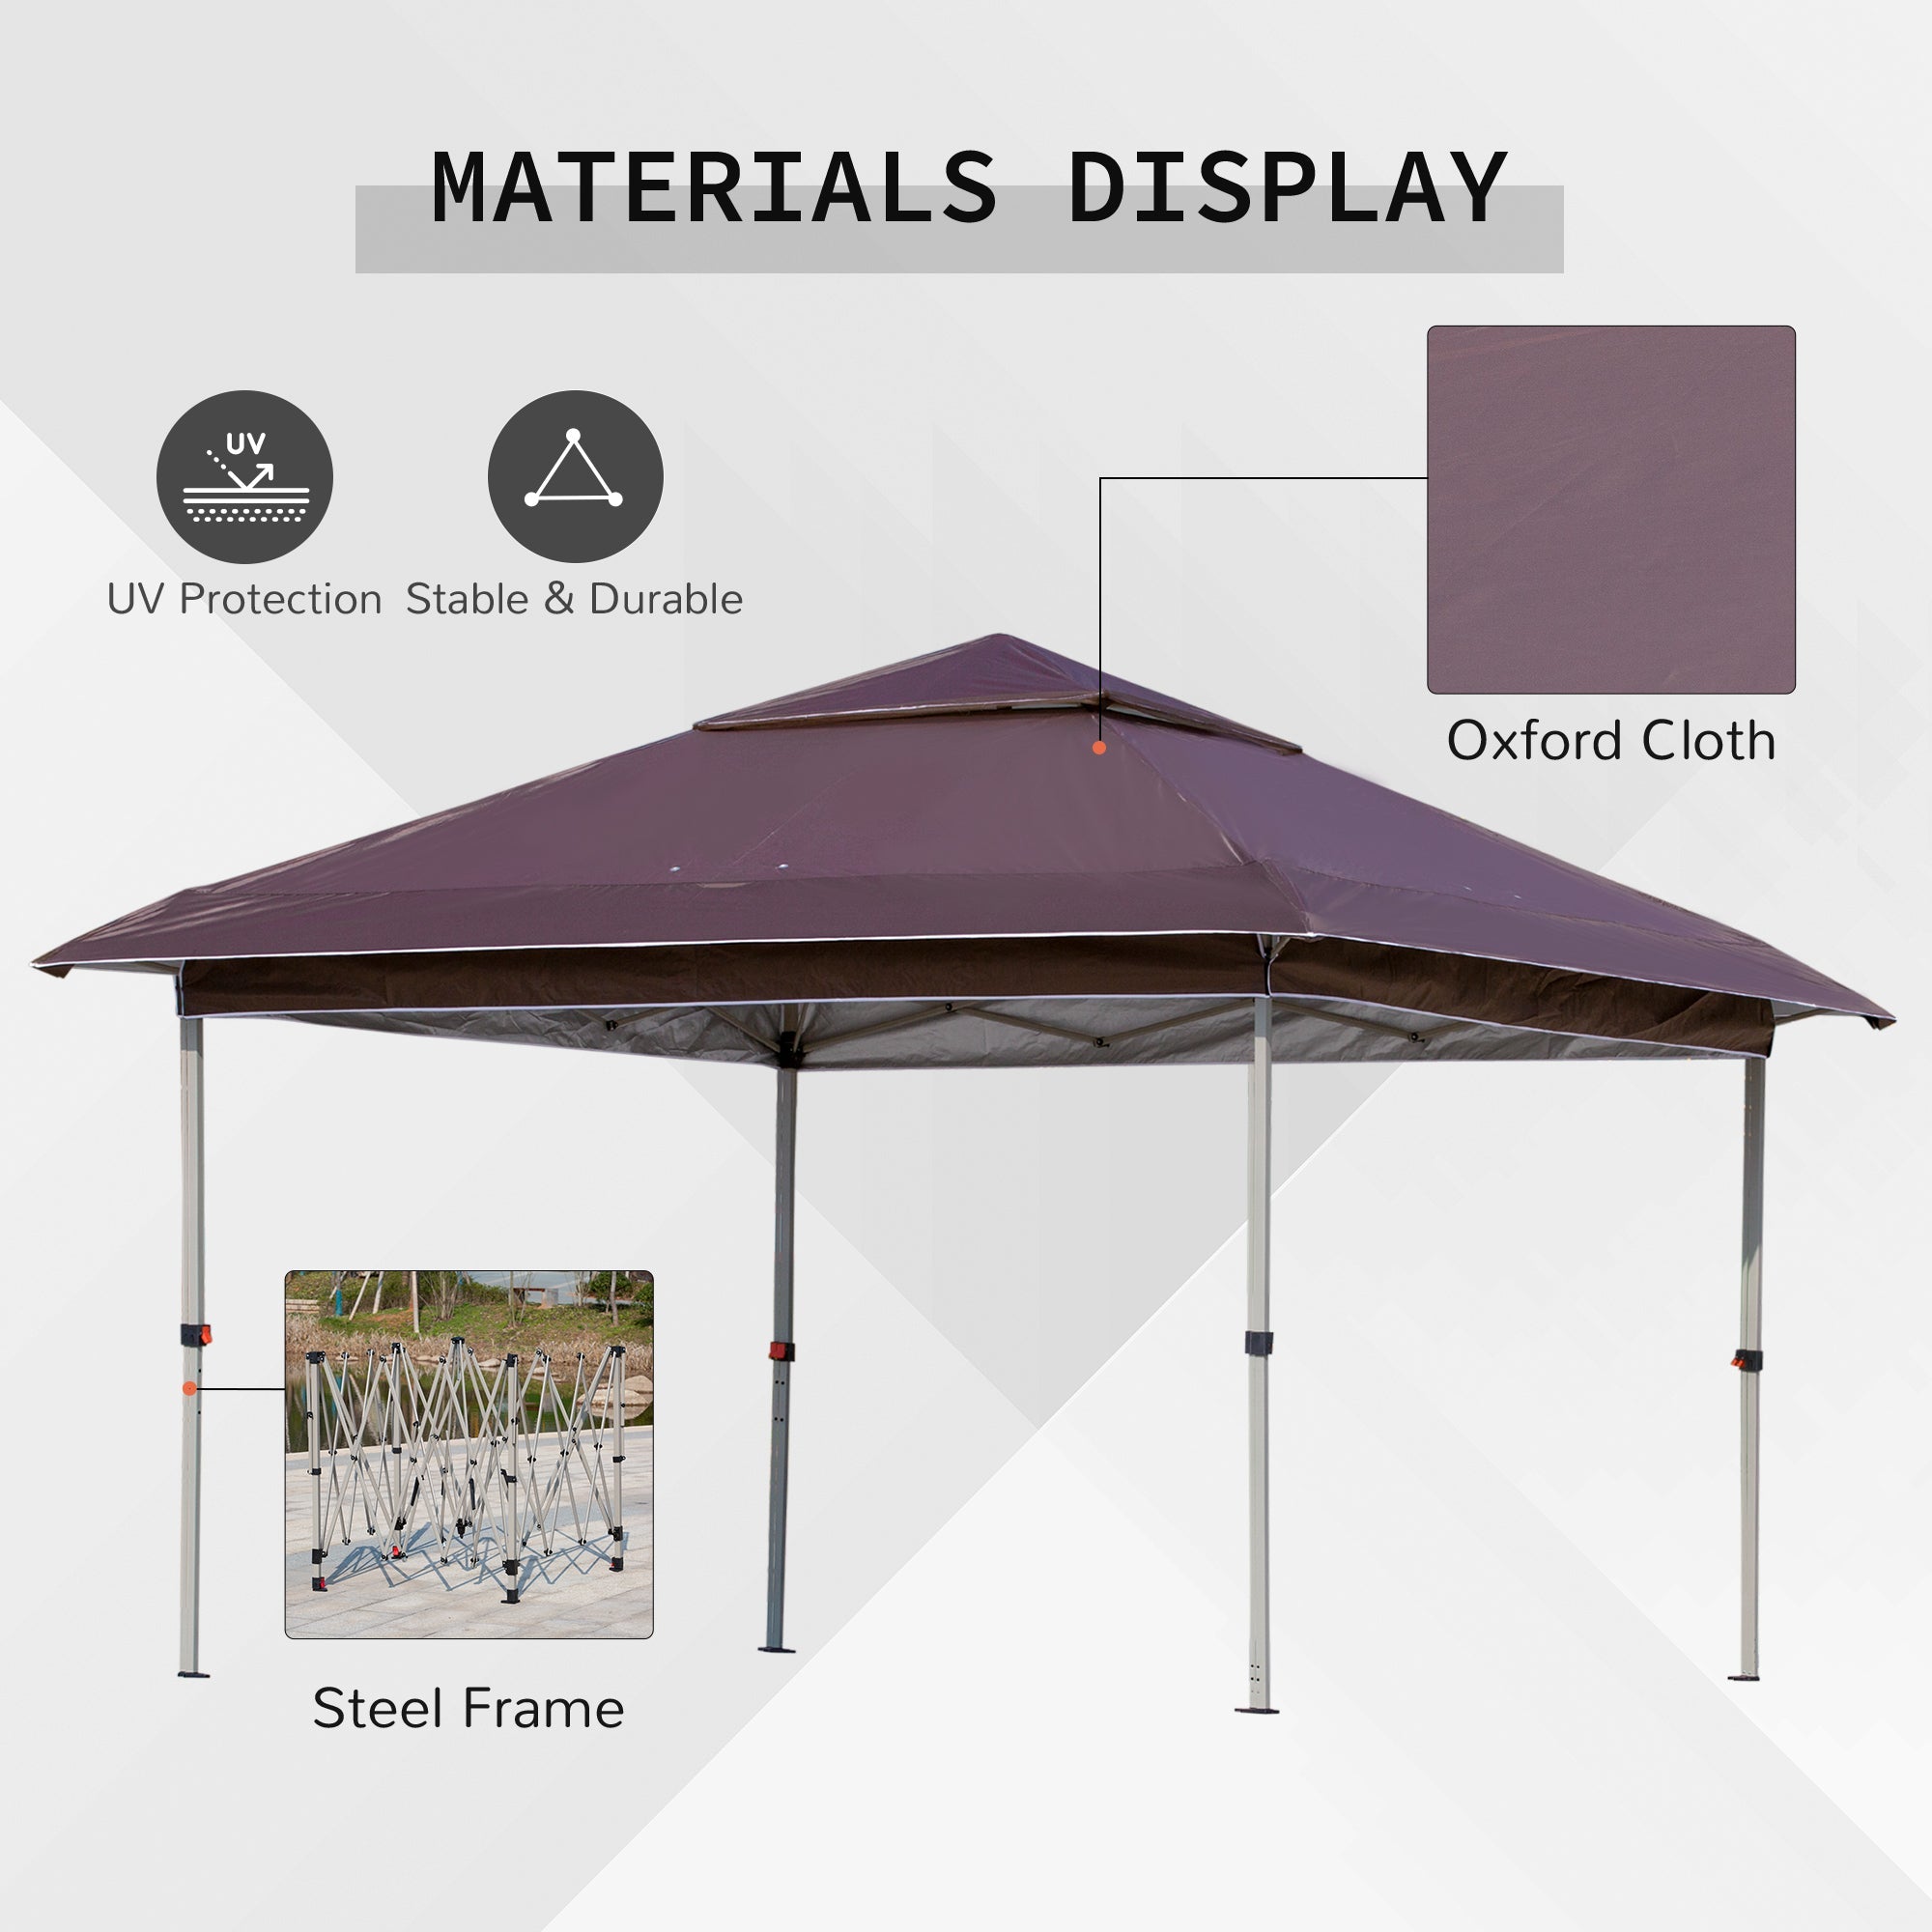 Outsunny 12' x 12' Pop Up Canopy Tent with Netting and Carry Bag, Instant Sun Shelter, Tents for Parties, Height Adjustable, for Outdoor, Garden, Patio, Brown